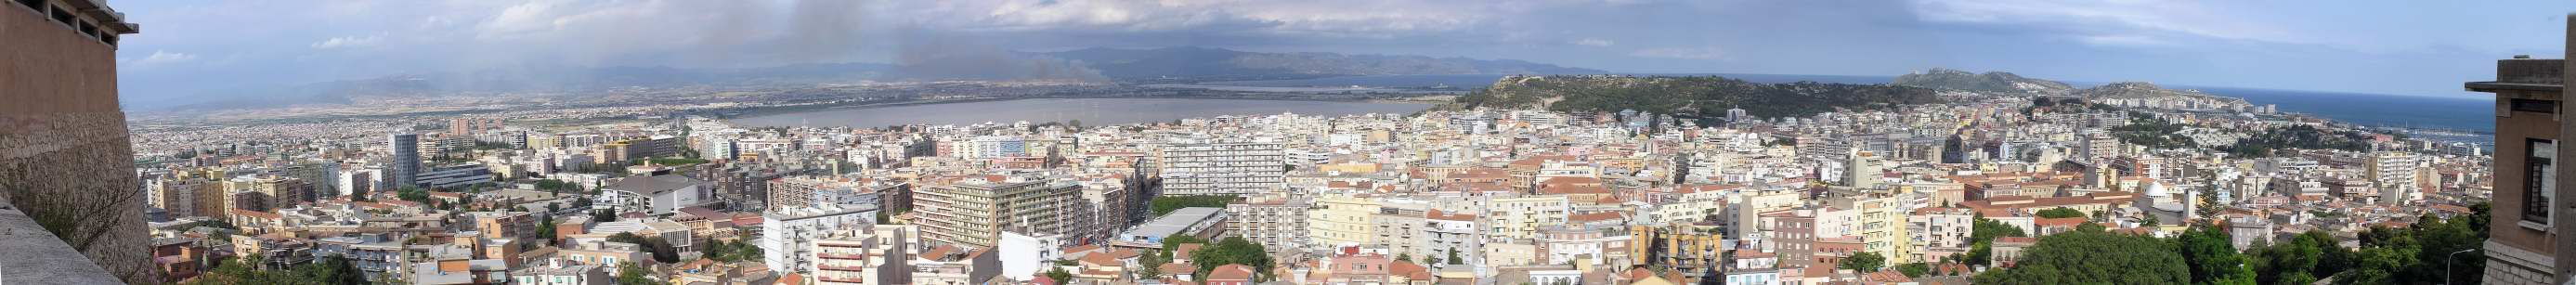 The nice panorama of Cagliari from the Pinacoteca Nazionale (scroll to the right to see the full picture)